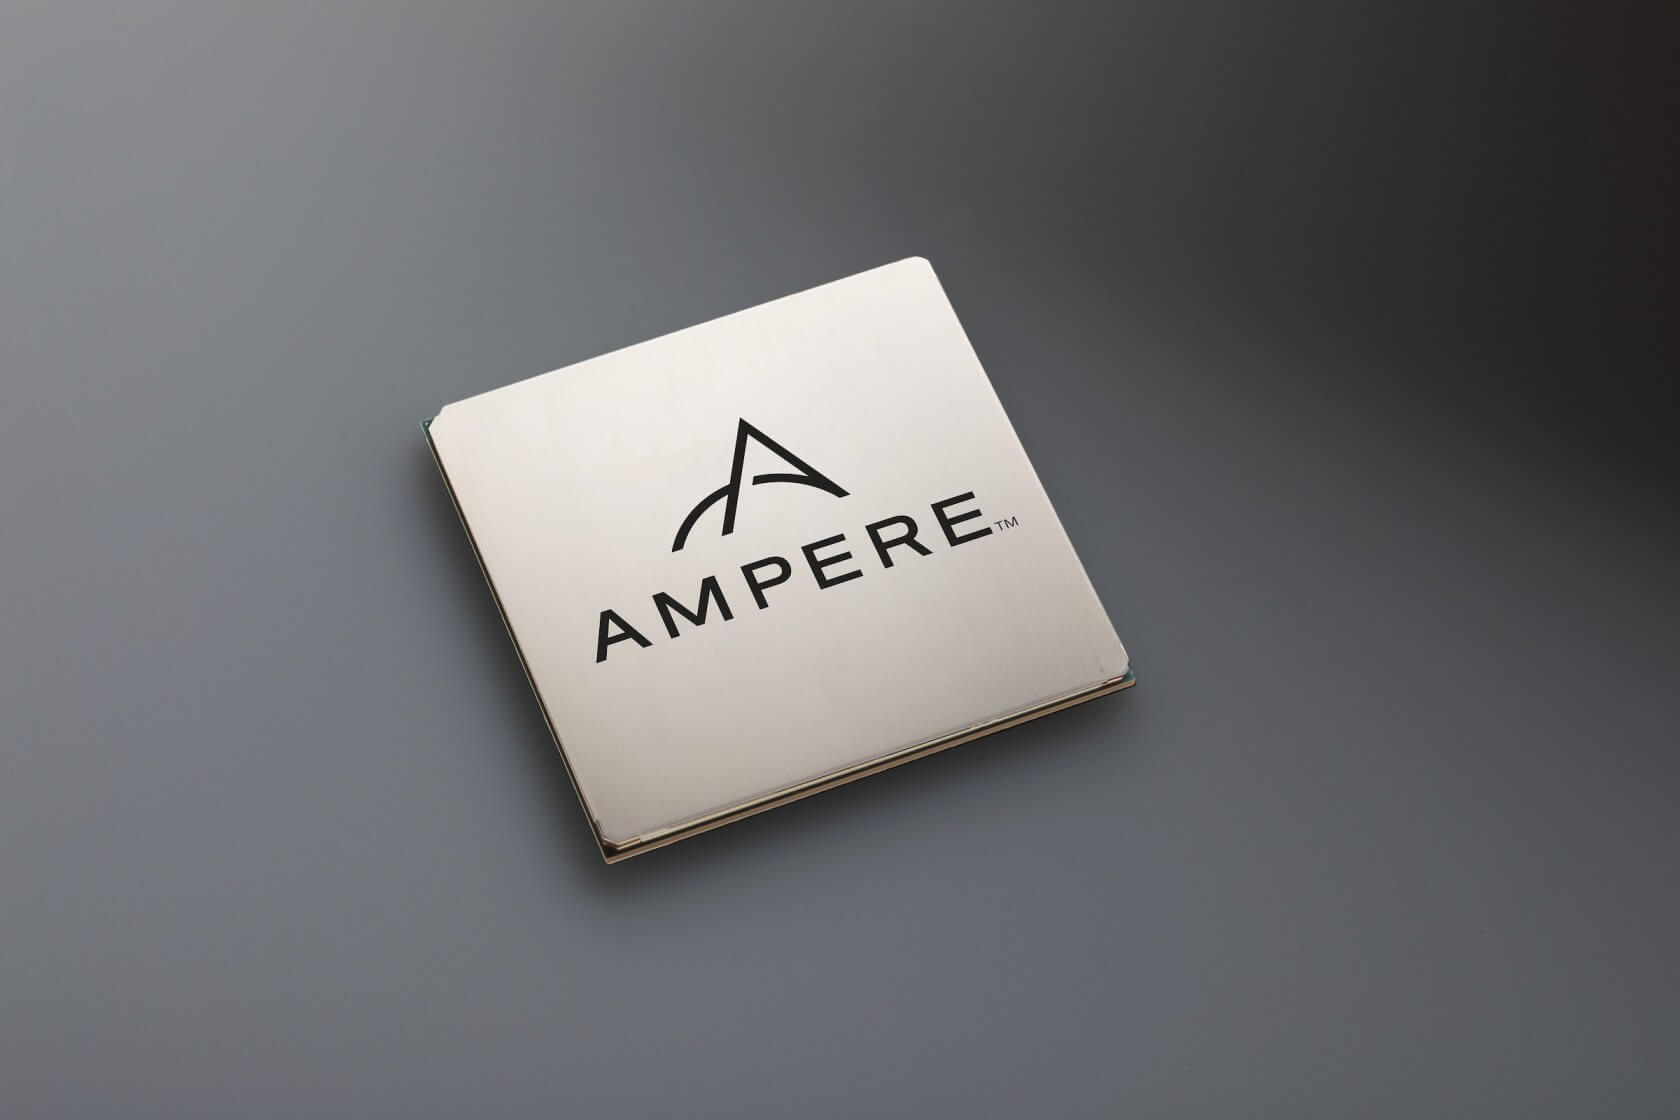 Ampere's Arm-based eMAG CPU is now available in a workstation